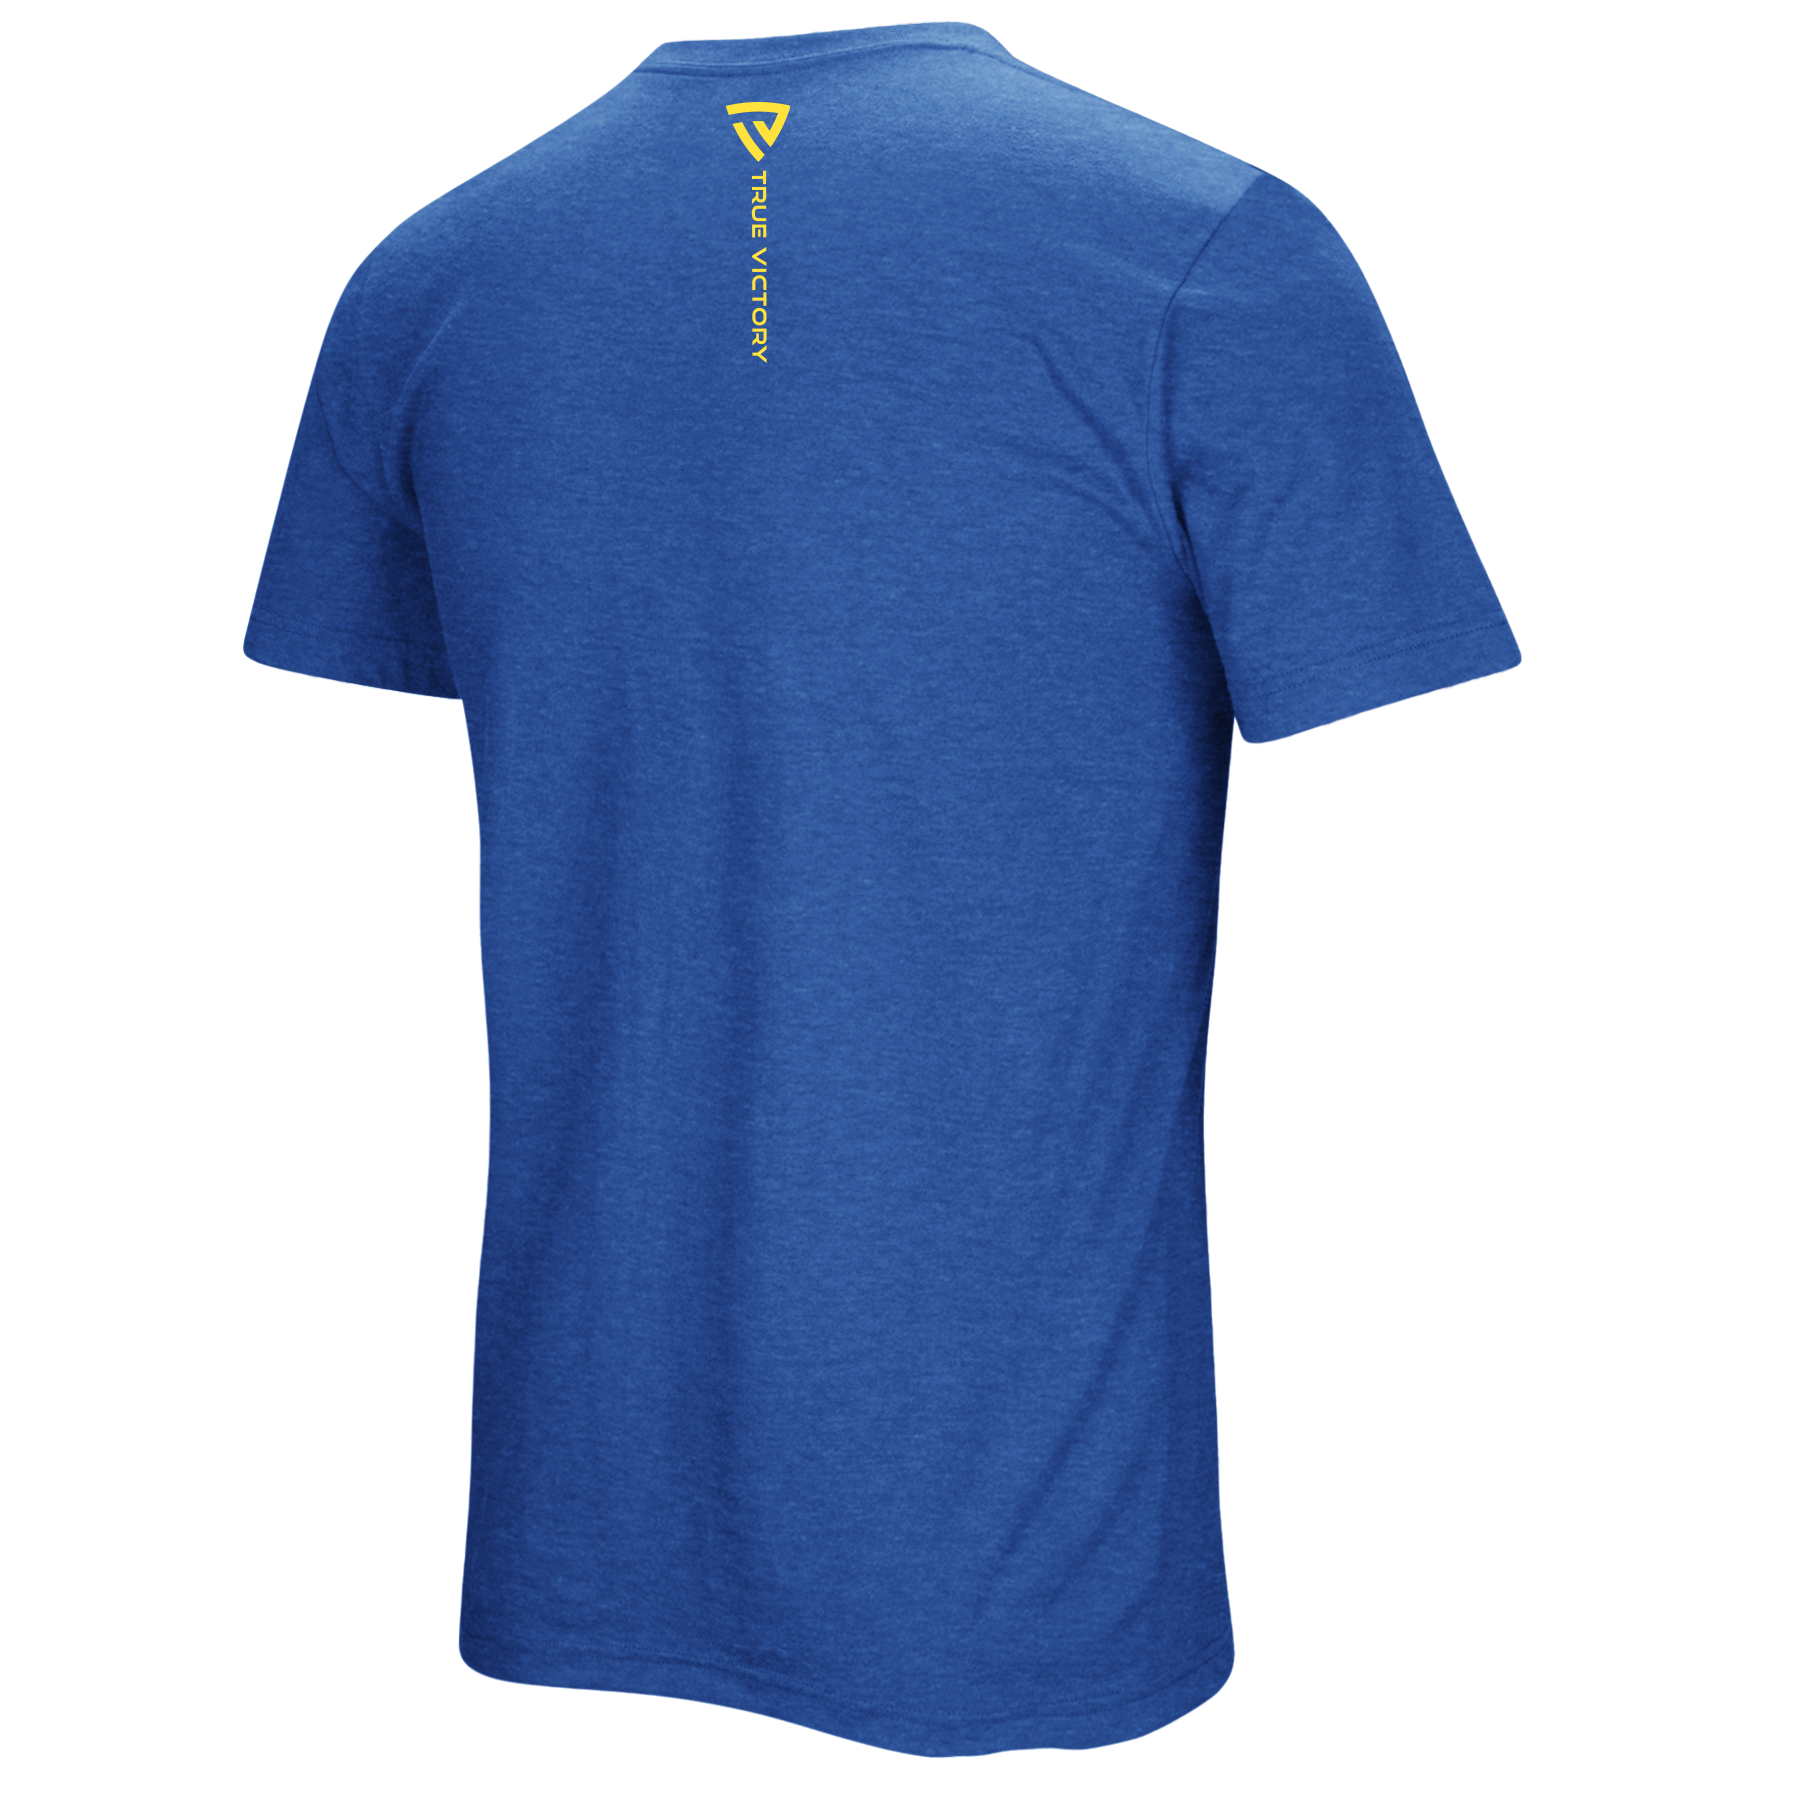 Men's Victorious Royal Tee